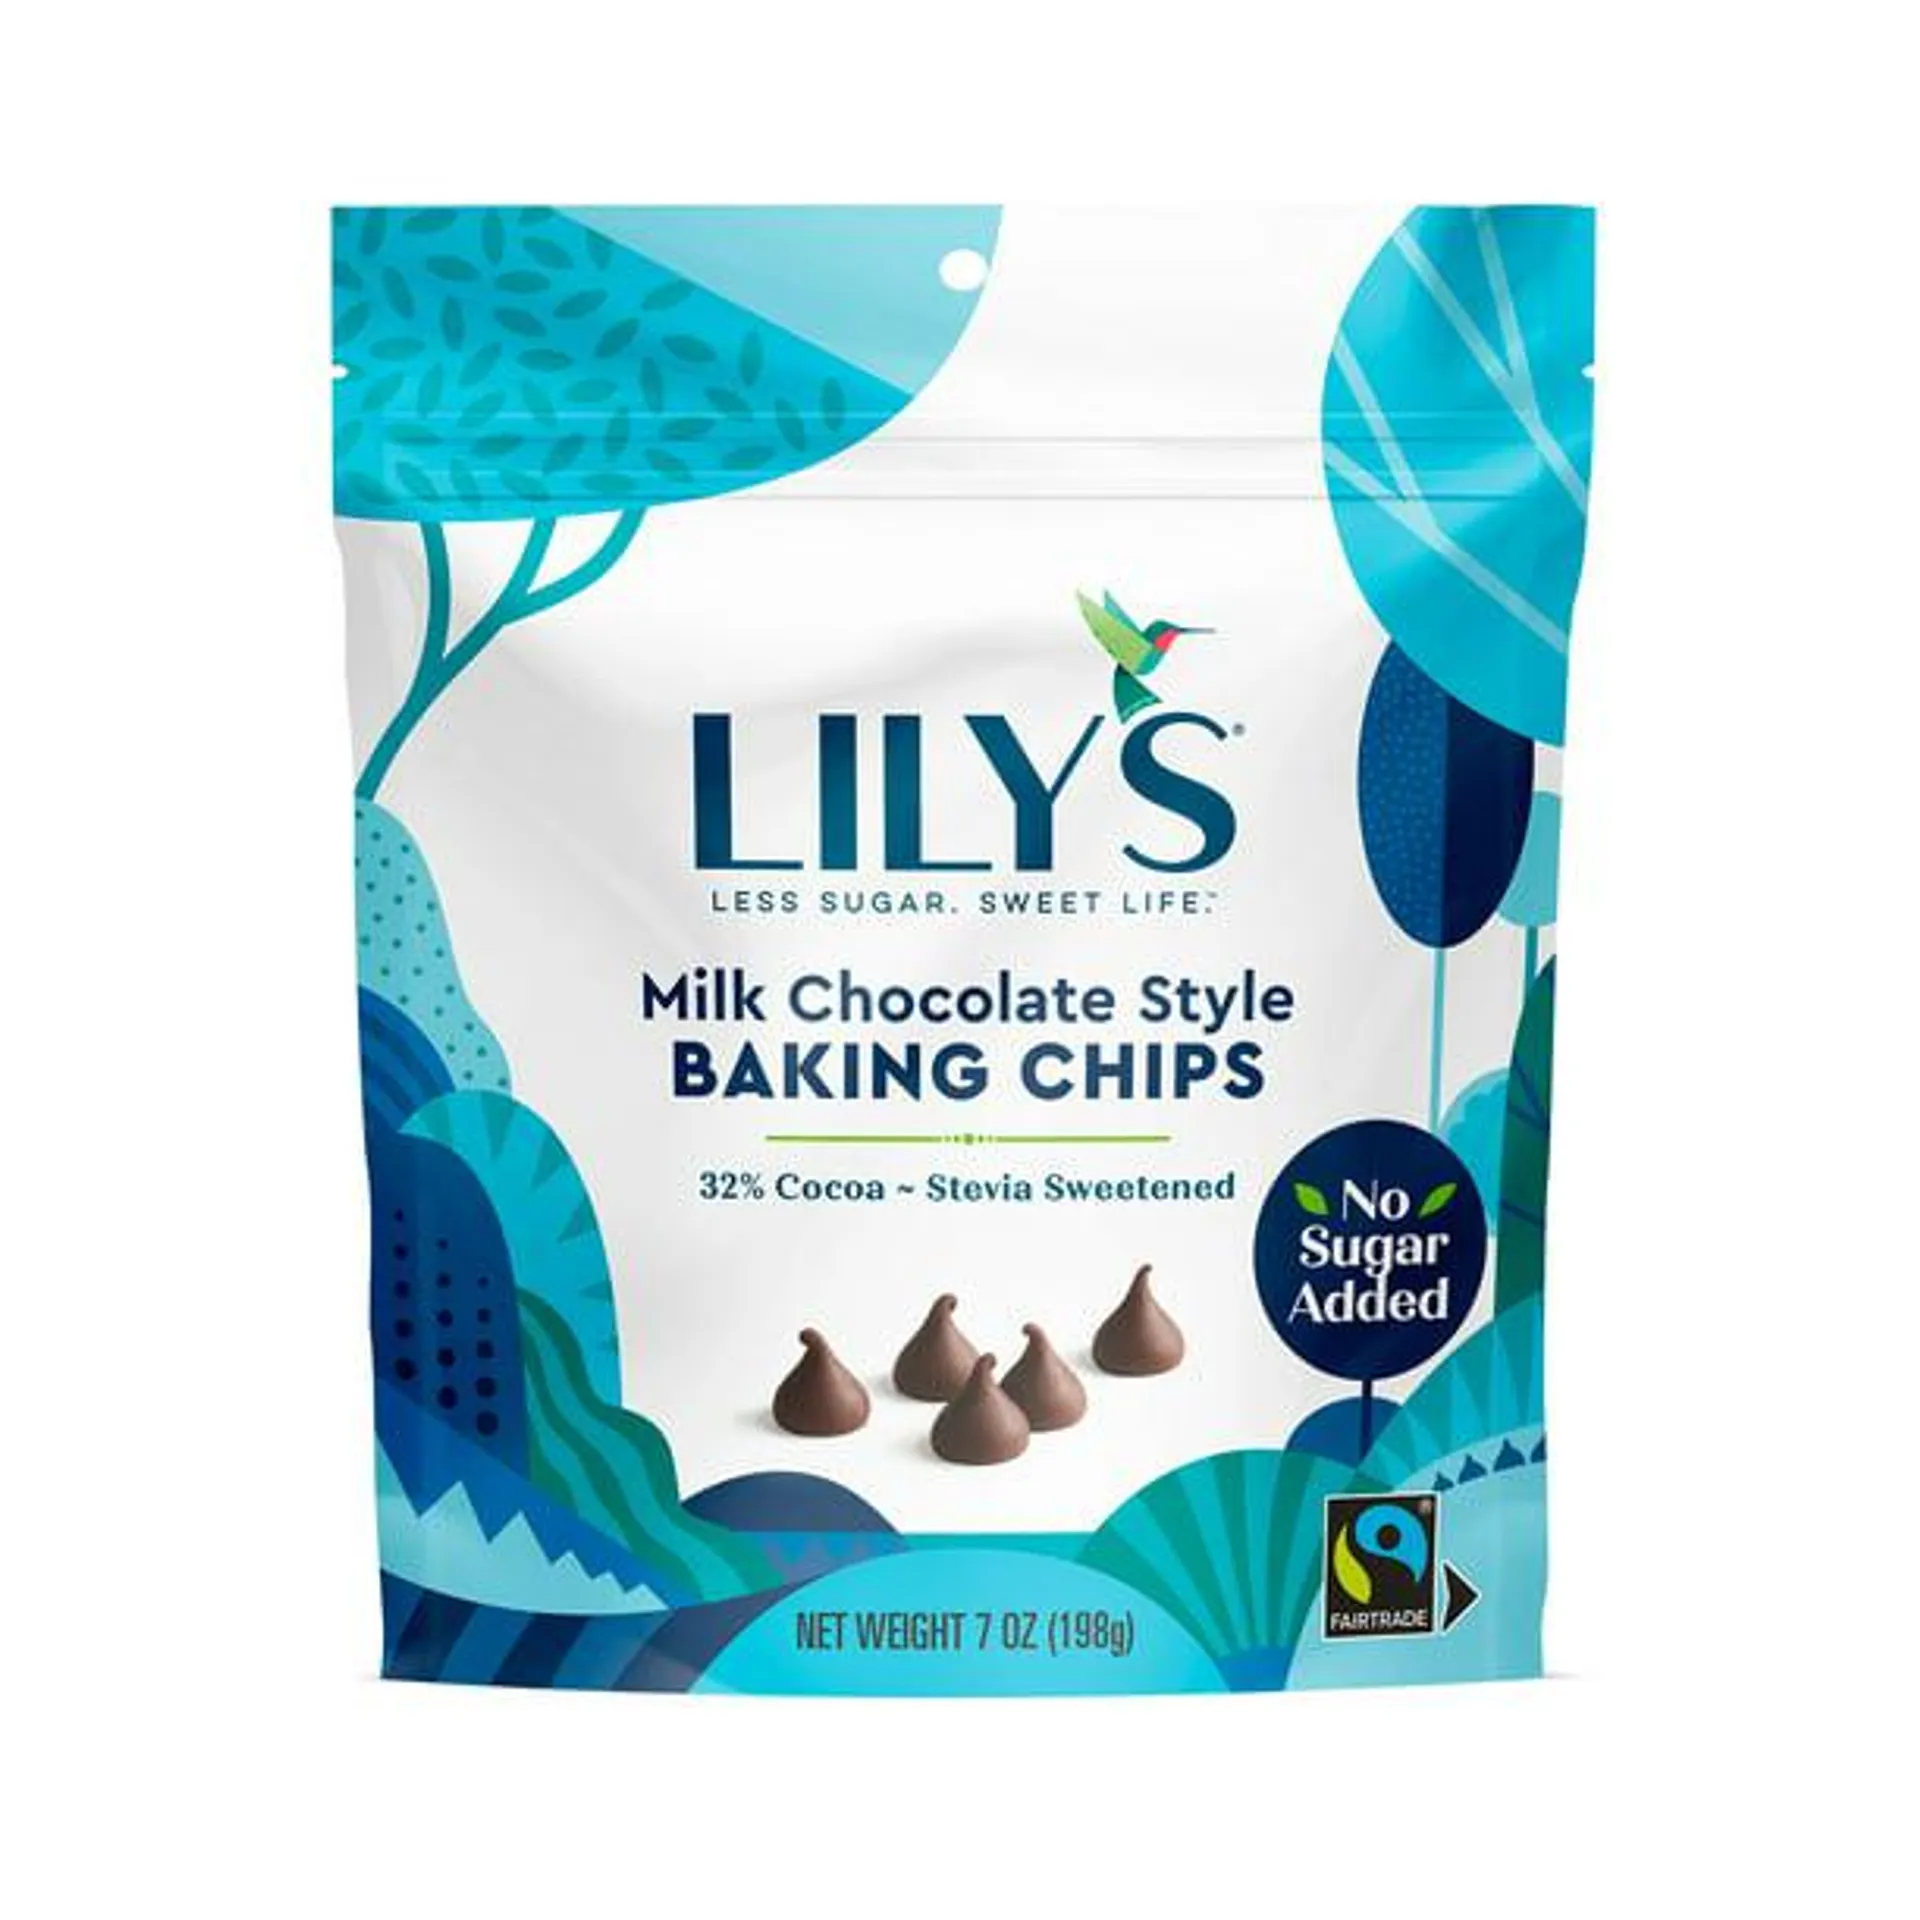 Lily's Milk Chocolate Style Baking Chips, 7 oz